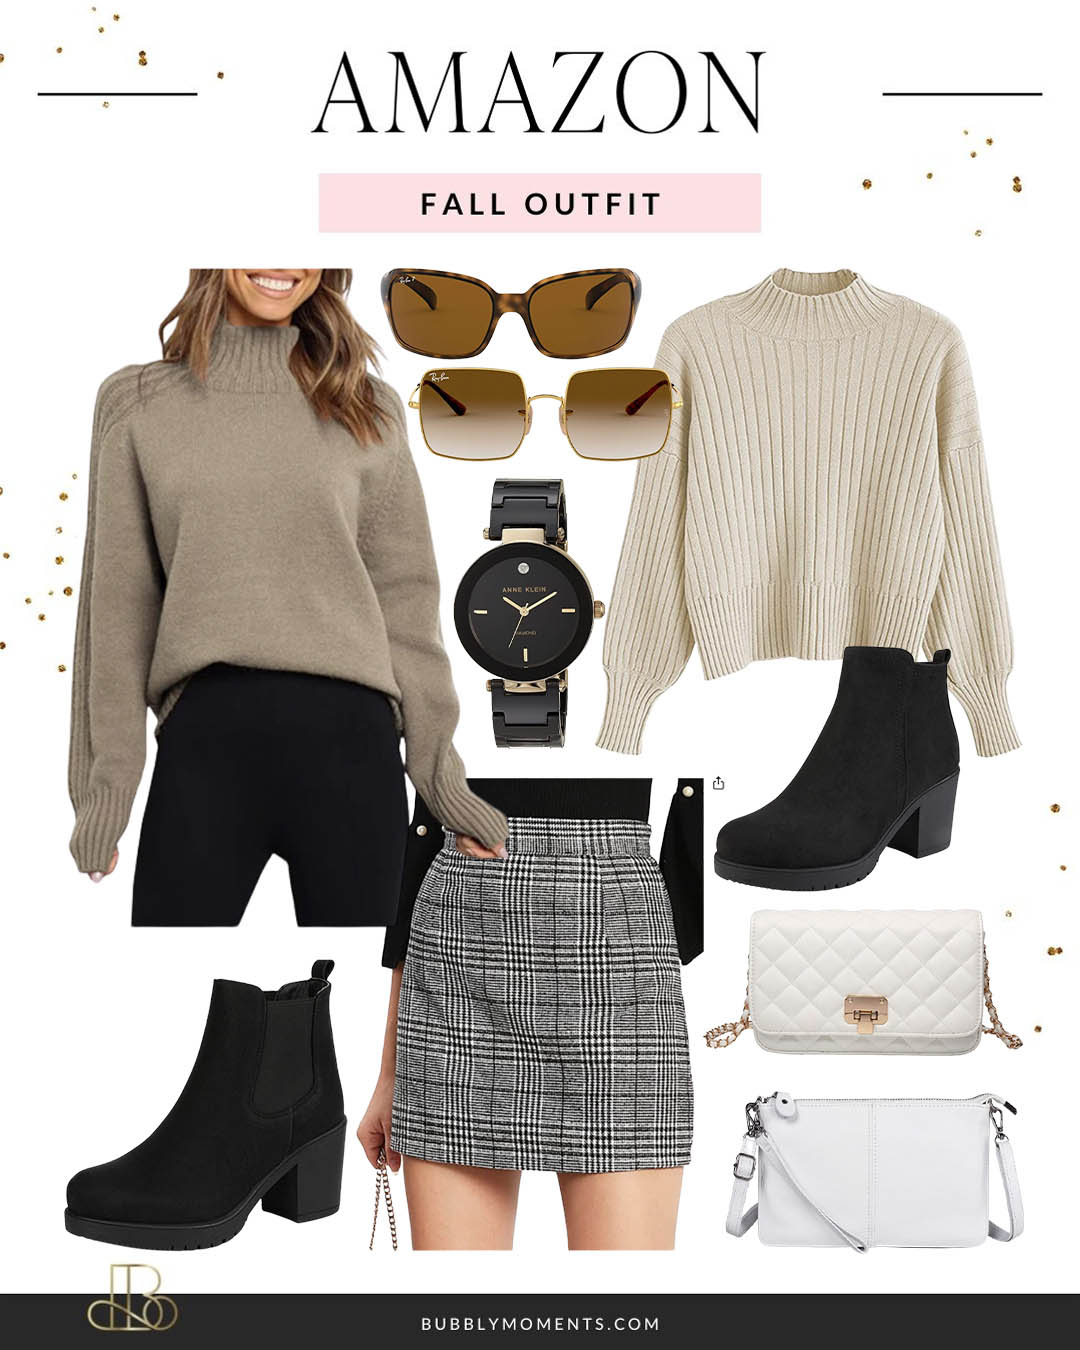 Fall Outfits Ideas 2022: Why it's All About Neutrals